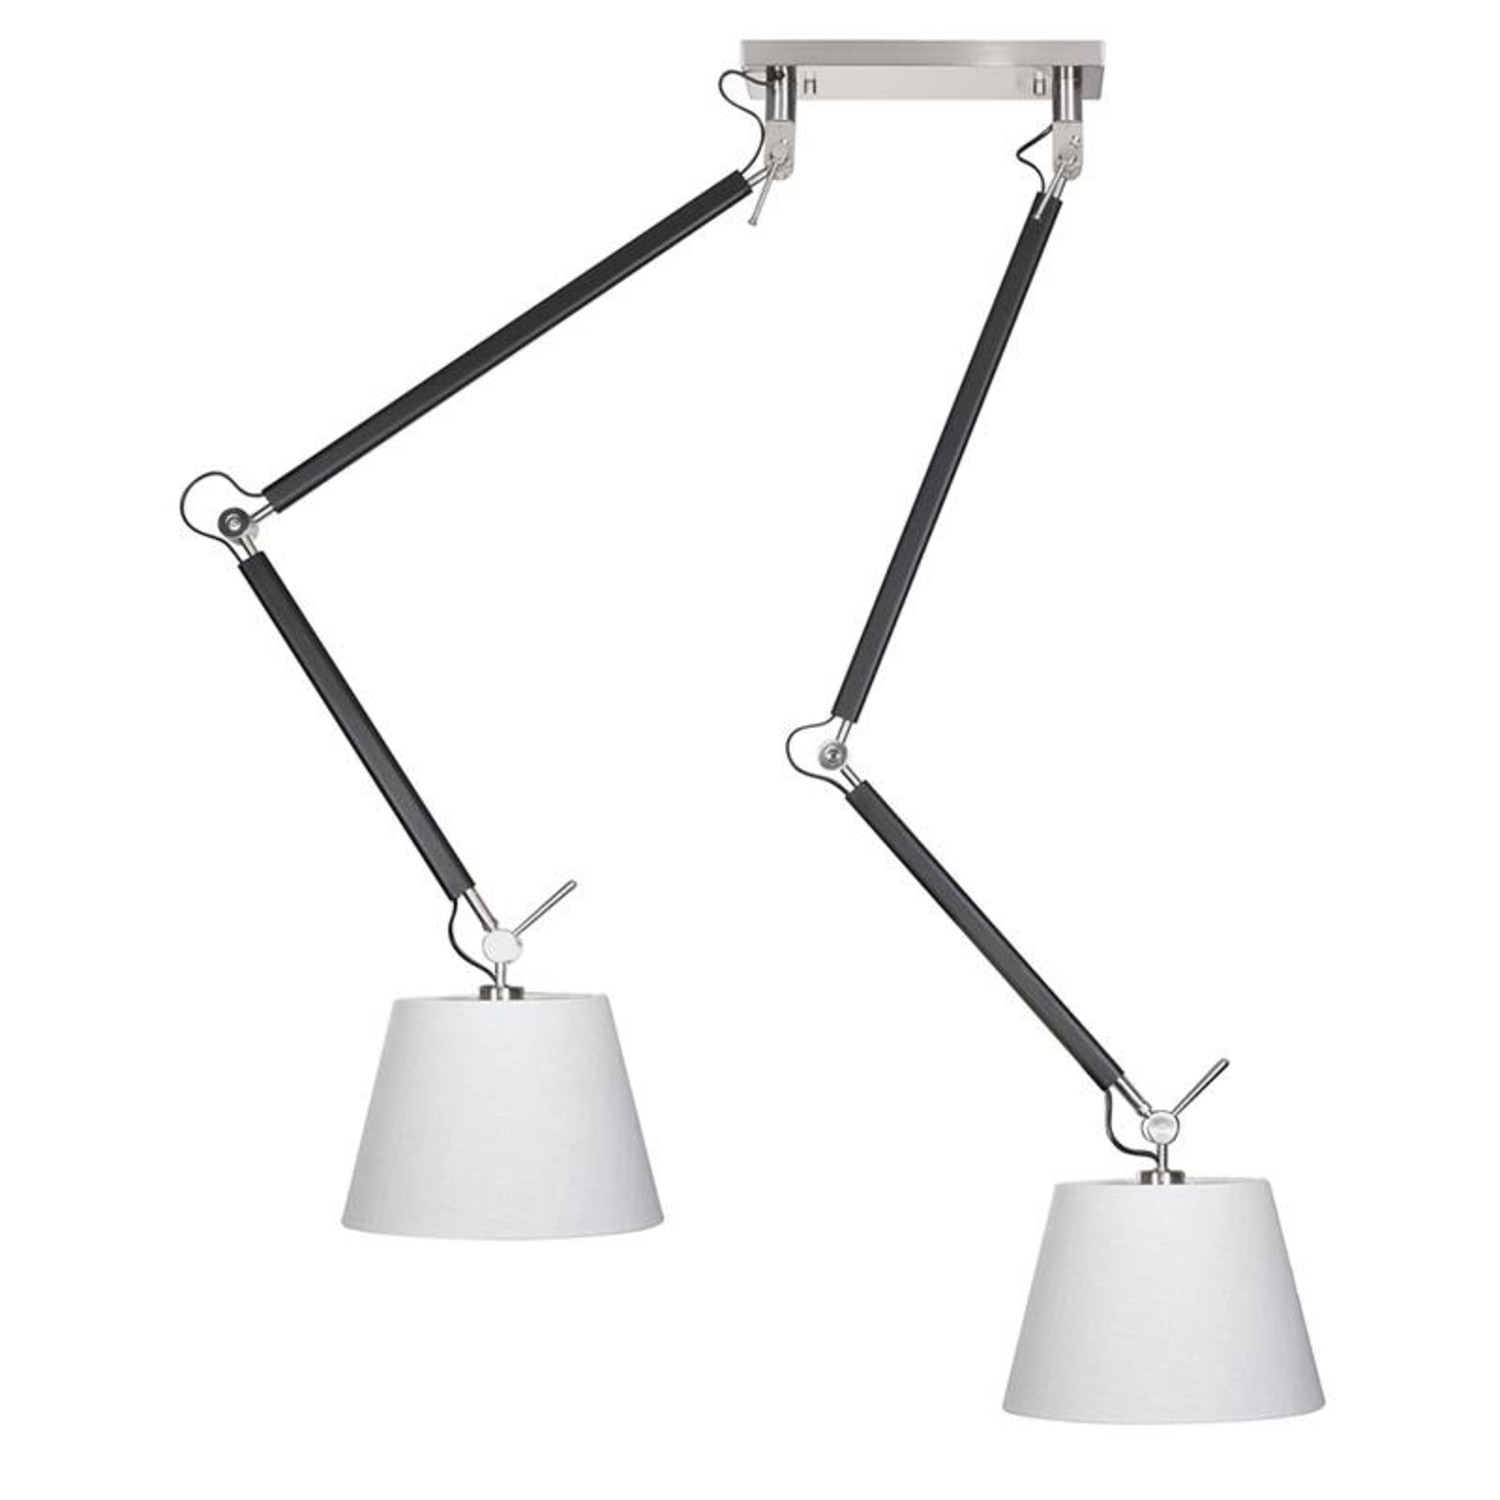 Voorouder enthousiast Goodwill Hanglamp Robuust 2 lichts Highlight - Lamponline.nl